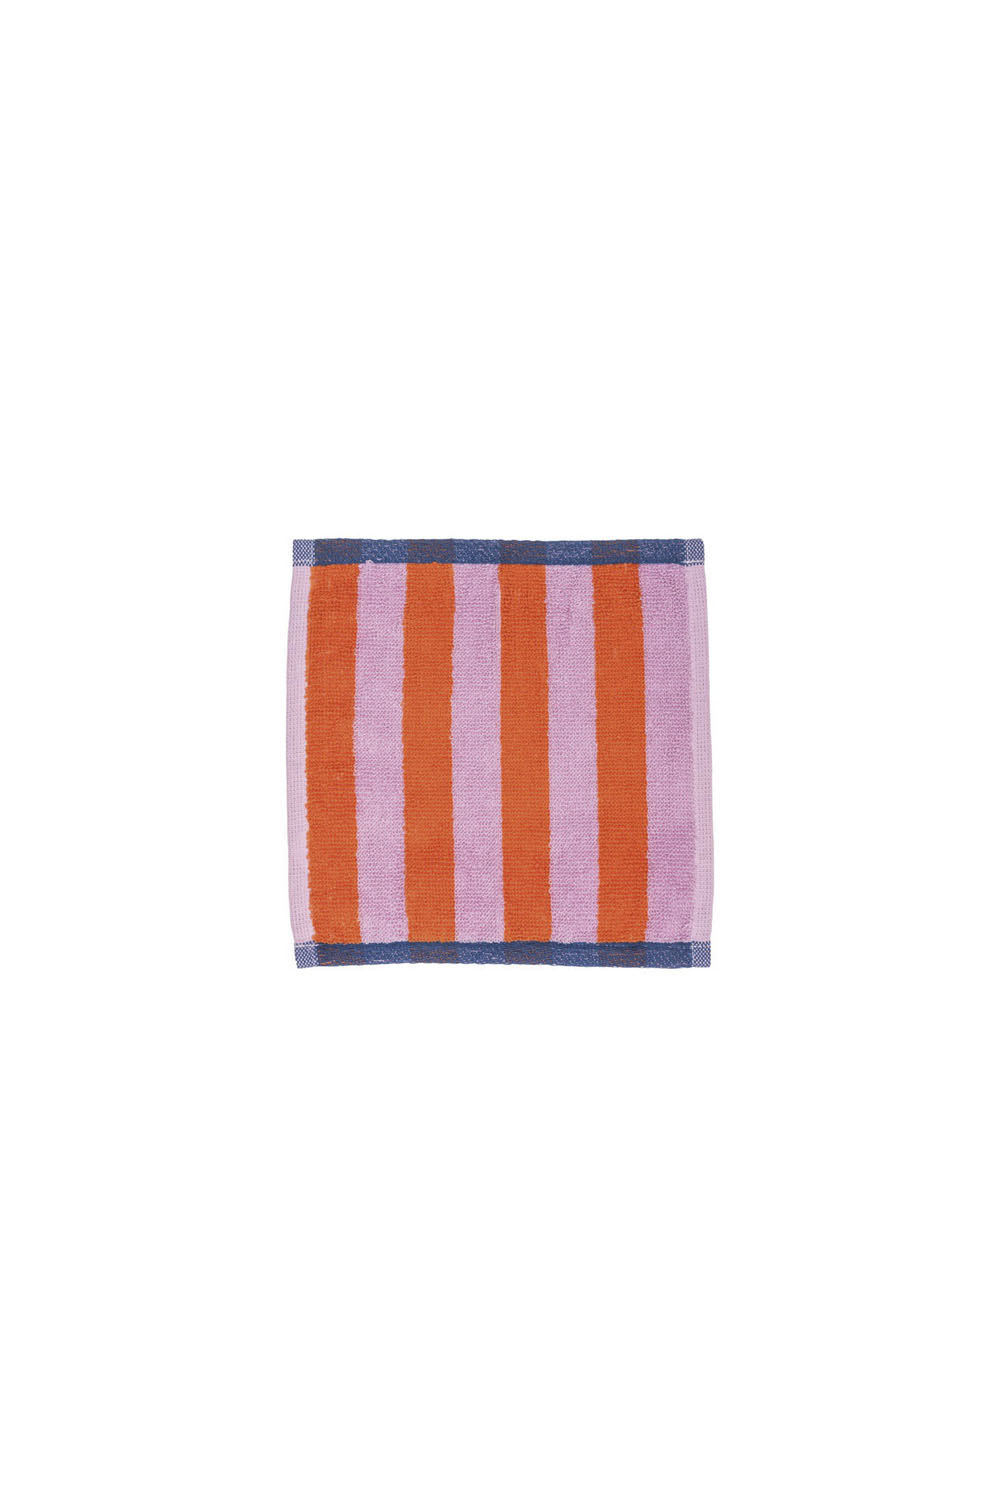 Frottee Abwaschtuch STRIPES orange-lila